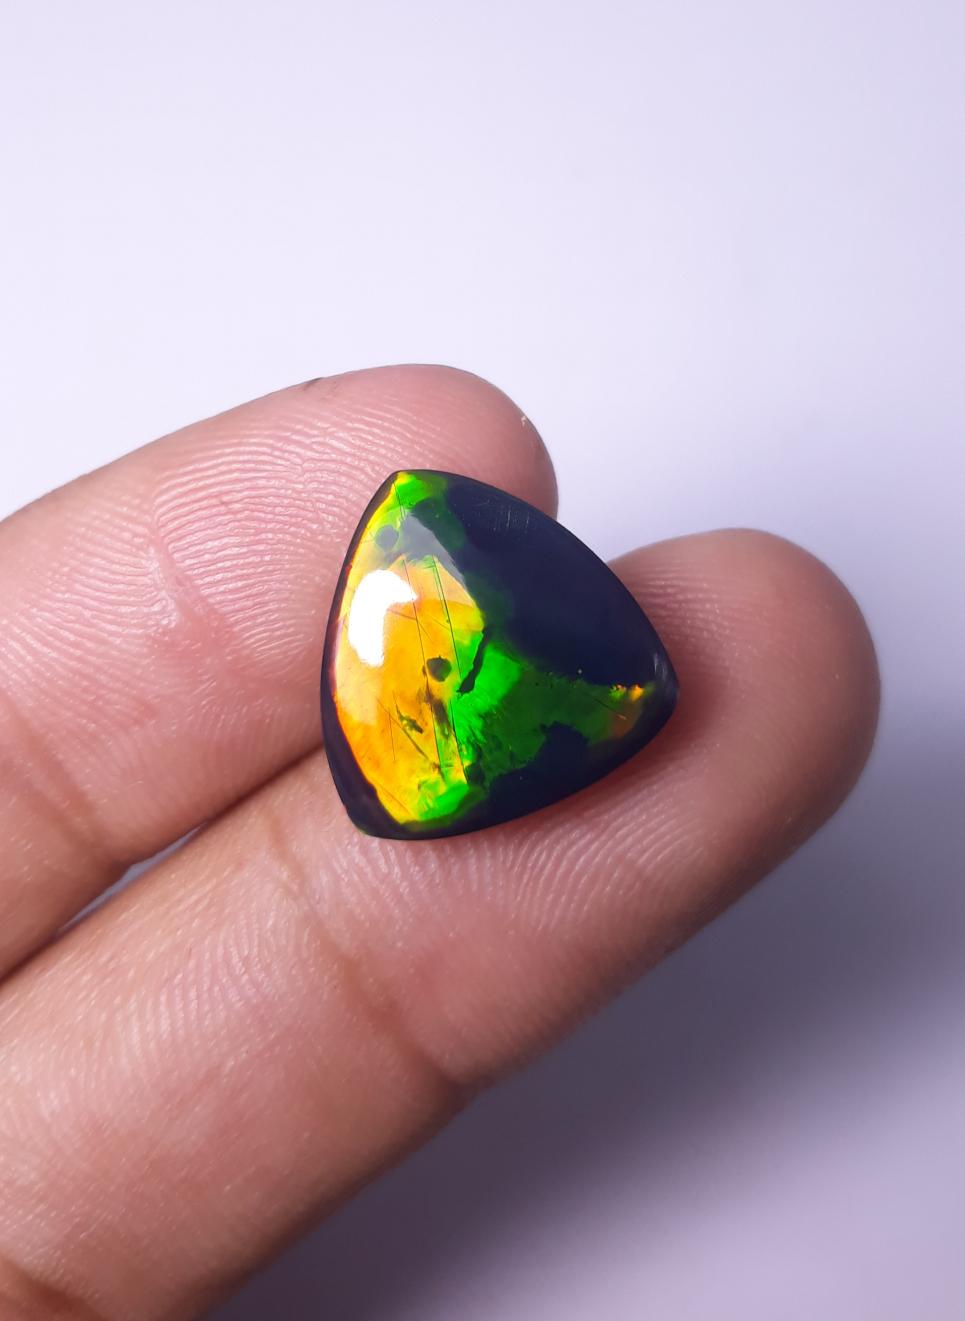 6.30ct Opal for Sale - Black Fire Opal - October Birthstone - 15.2x15.2x6.2mm